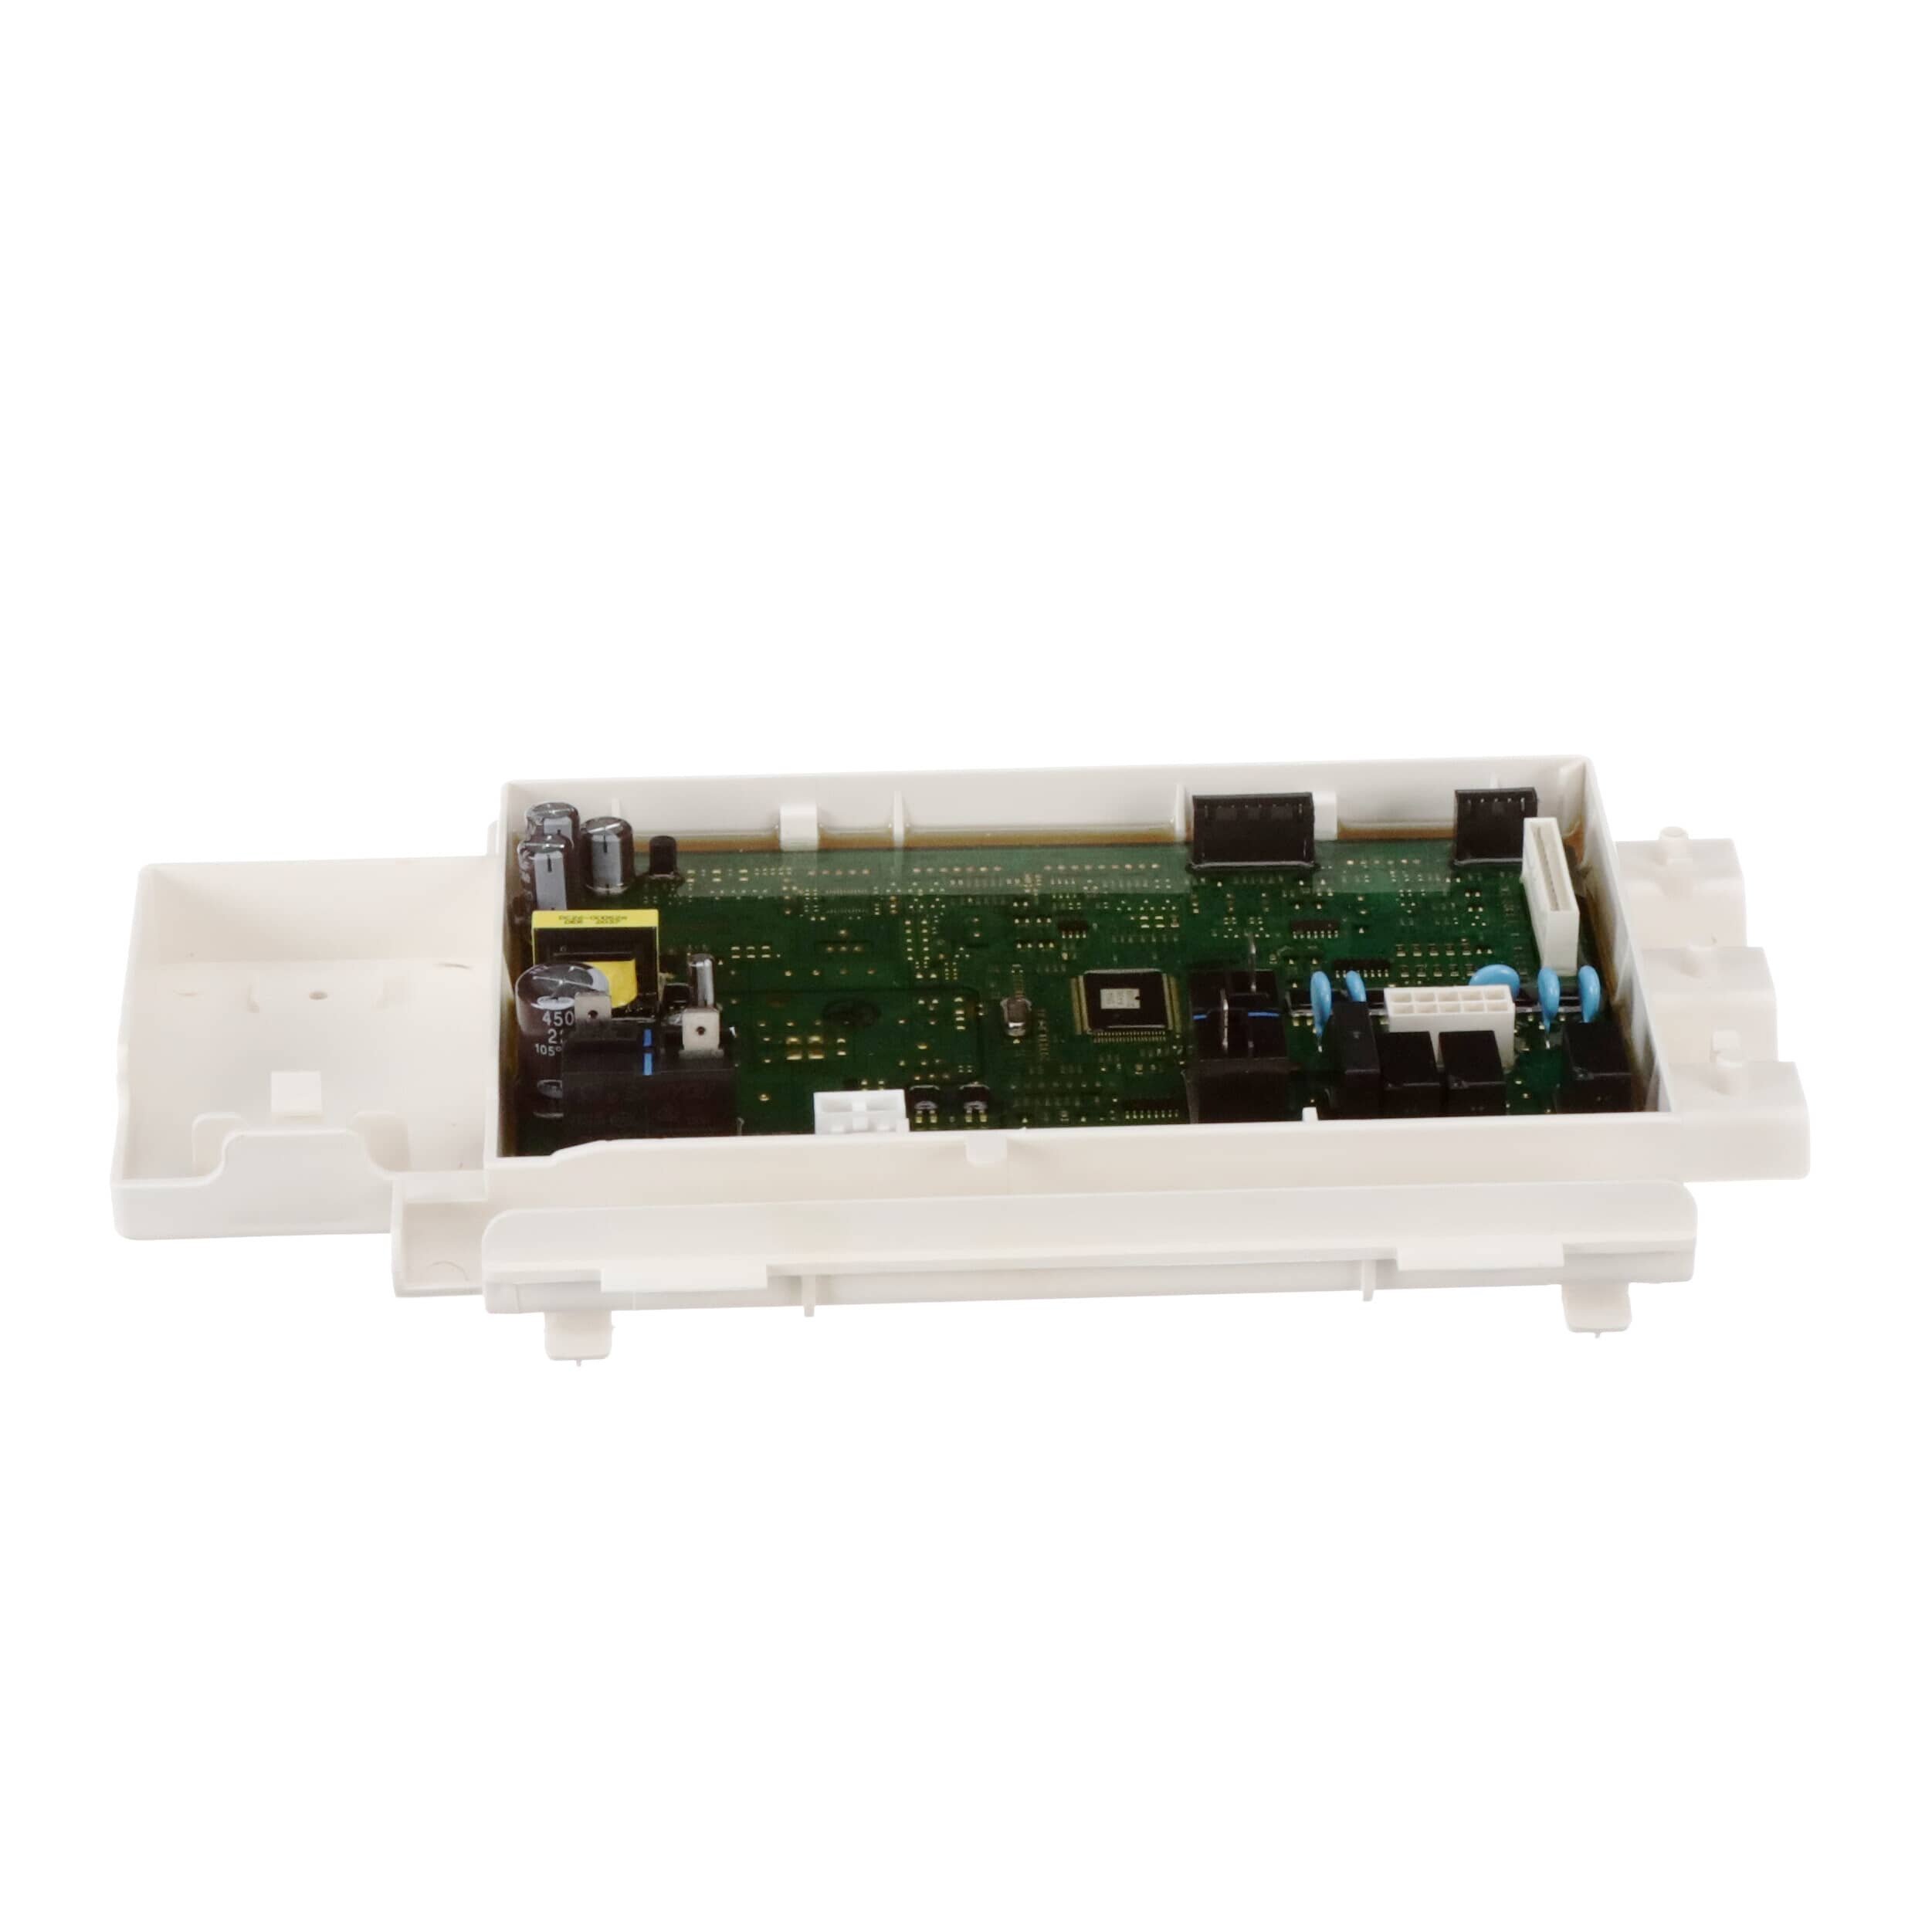 Samsung DC92-01621C Washer Electronic Control Board